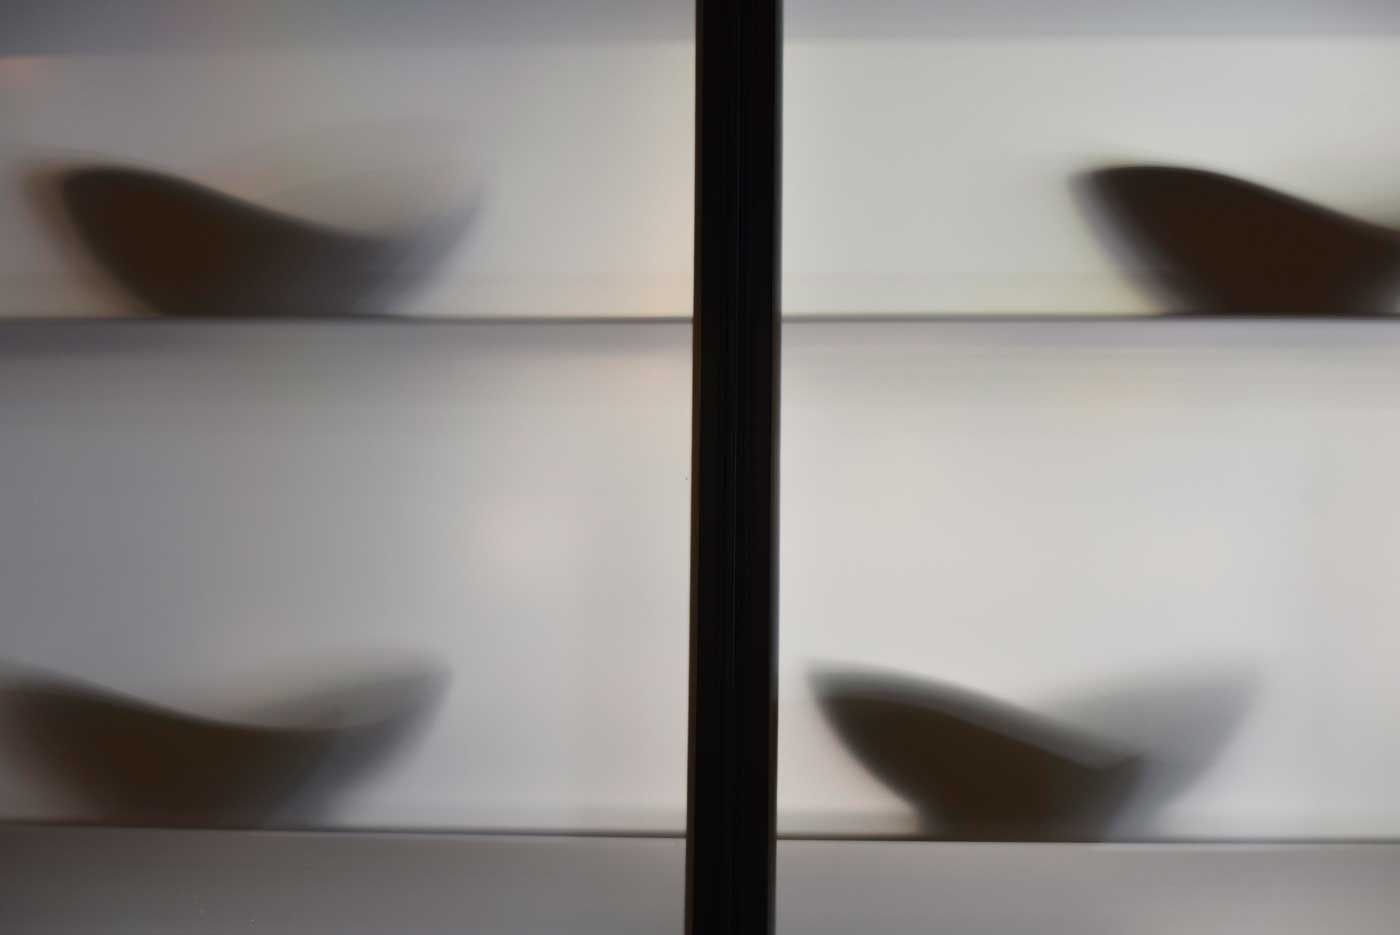 Shadows of serving platters are seen through frosted glass separating the kitchen at Volta and the dining area.